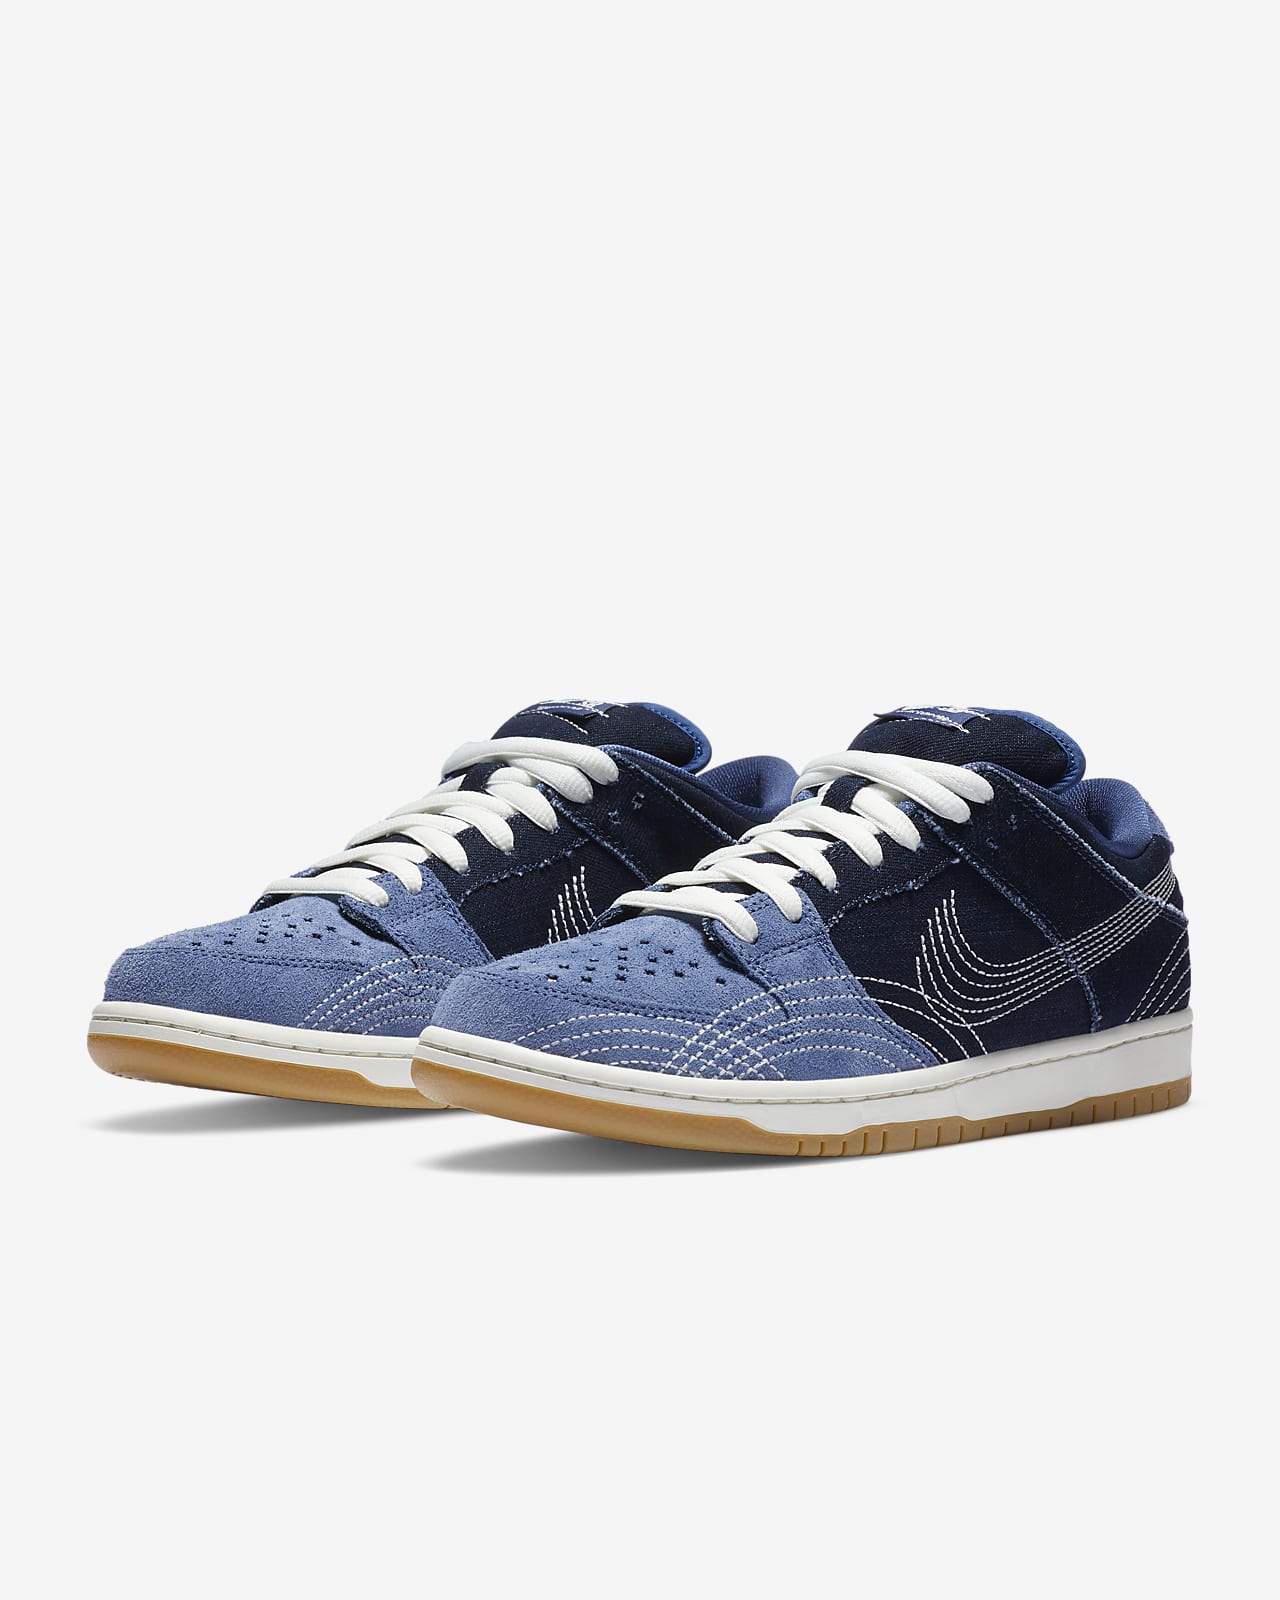 nike dunk low skate shoes